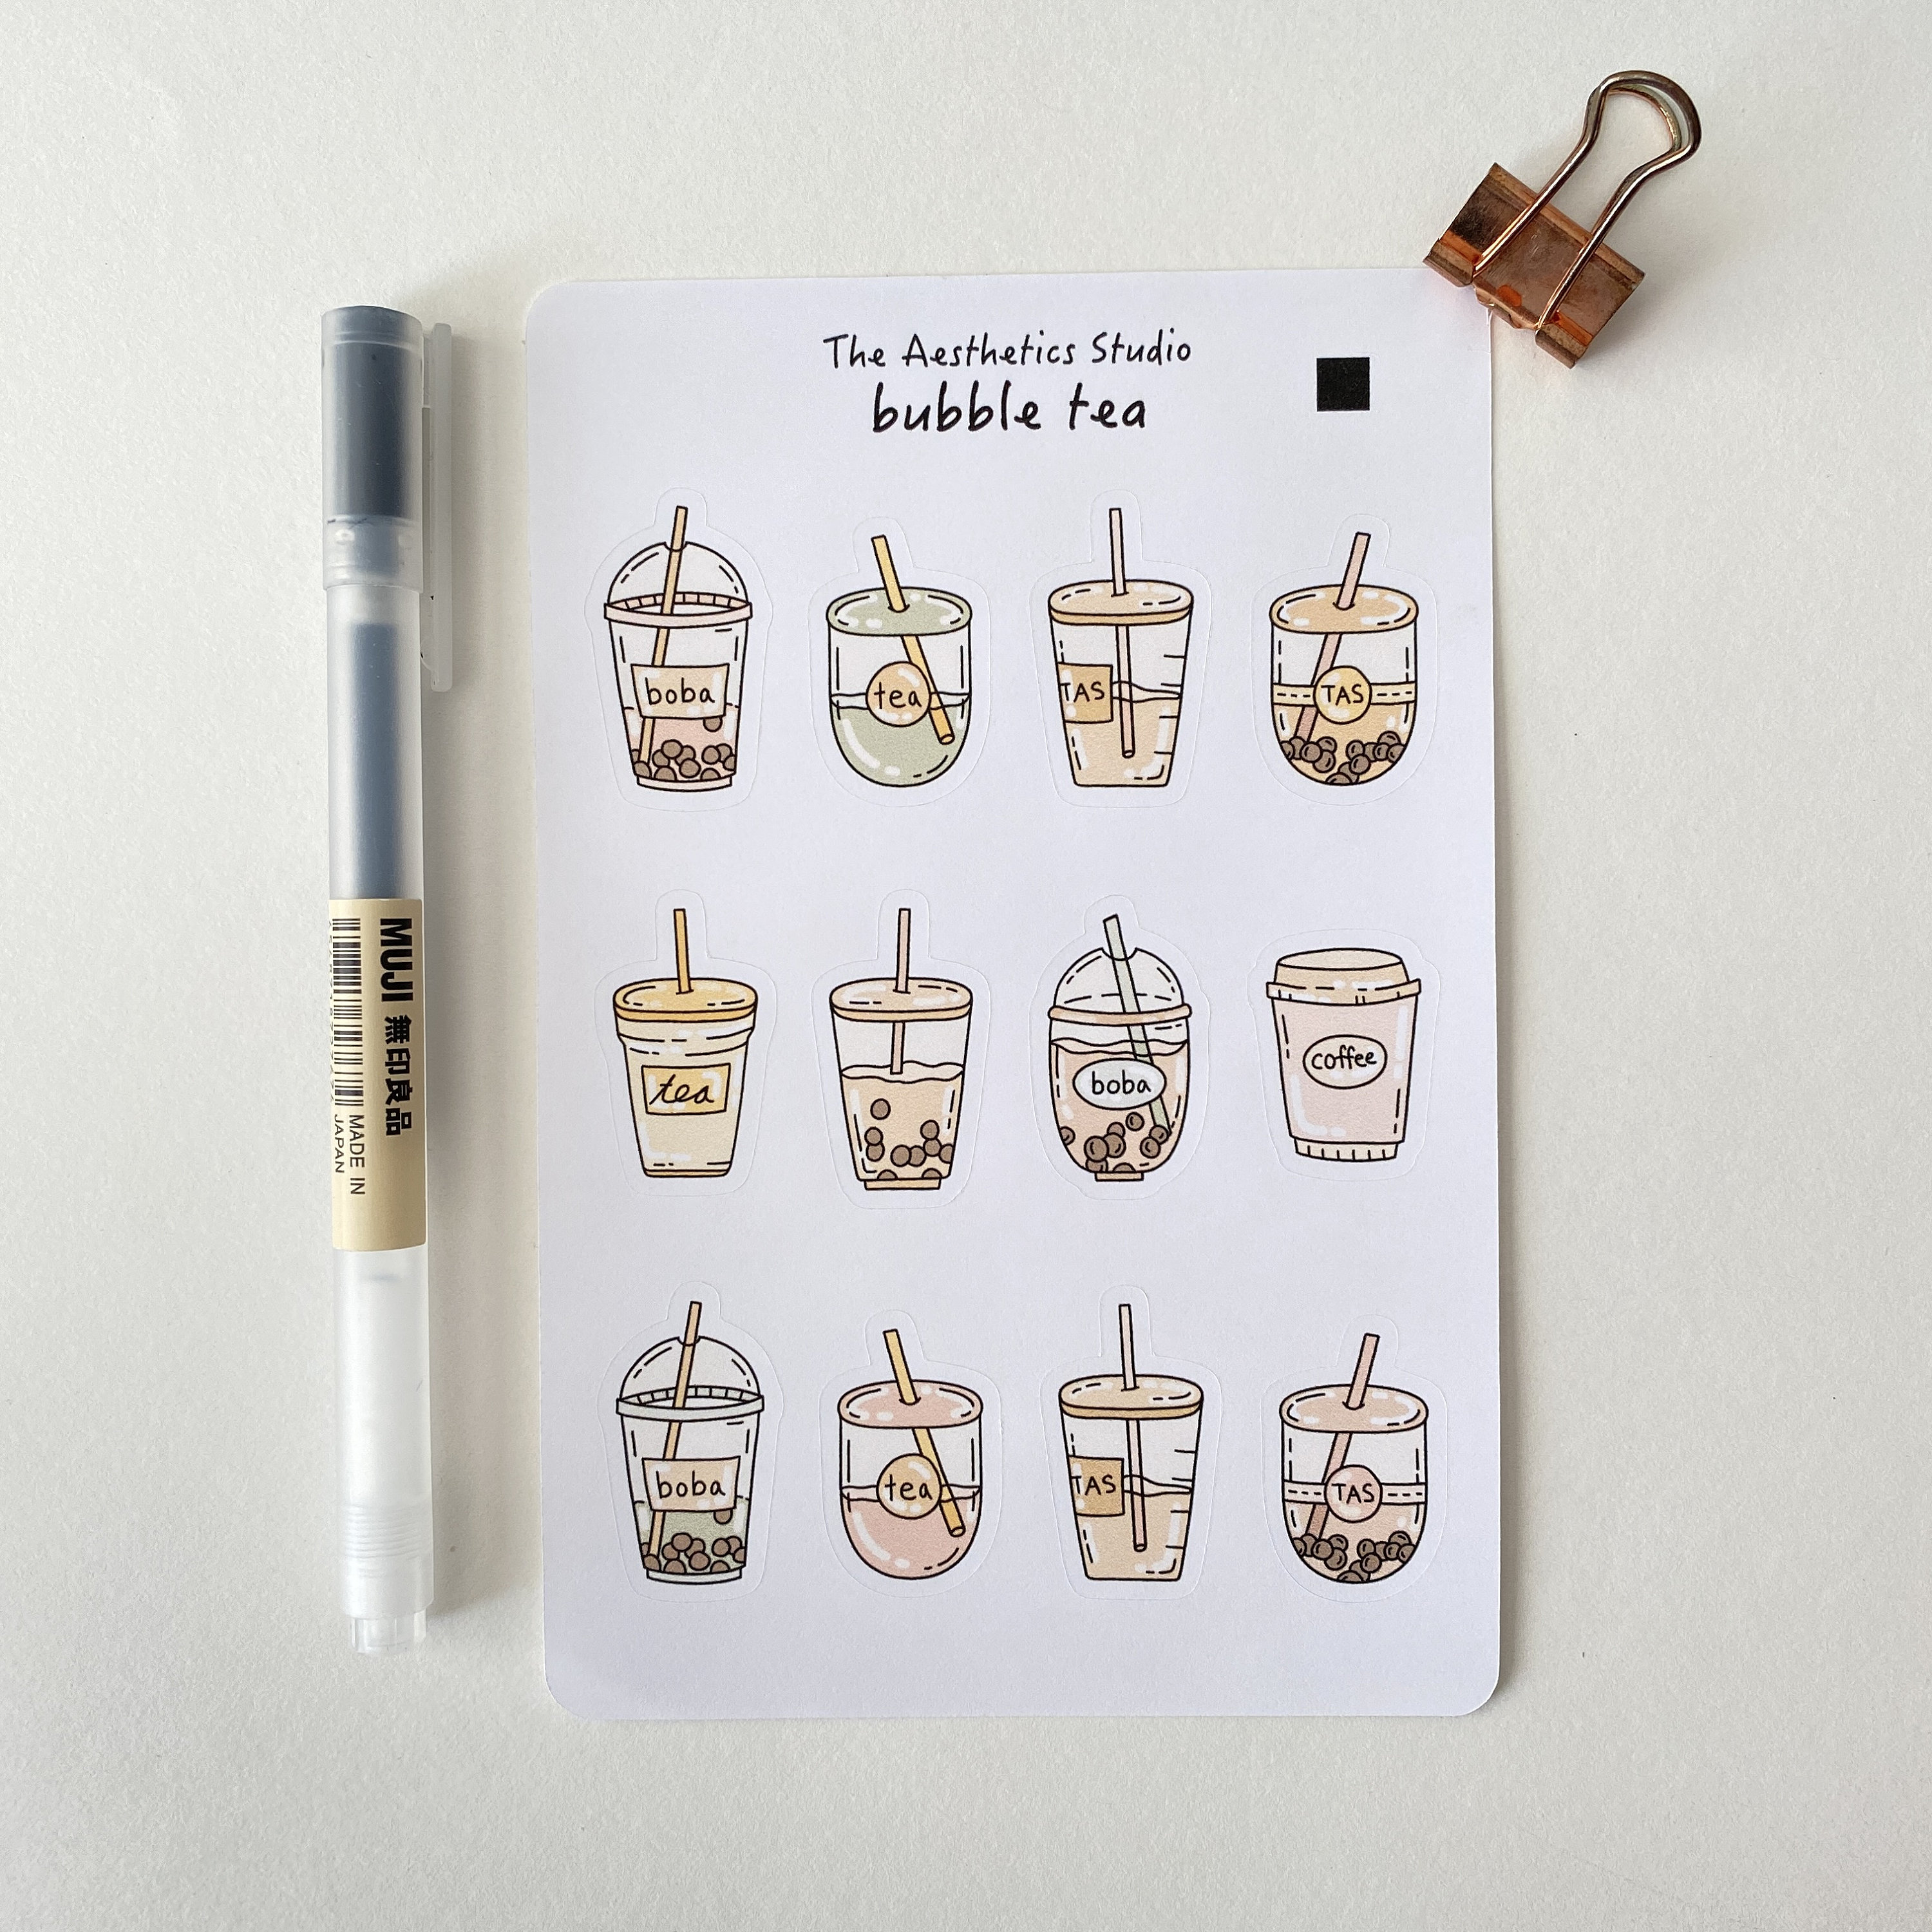 44 Asian Food Stickers, Food & Drink Theme Planner Journal